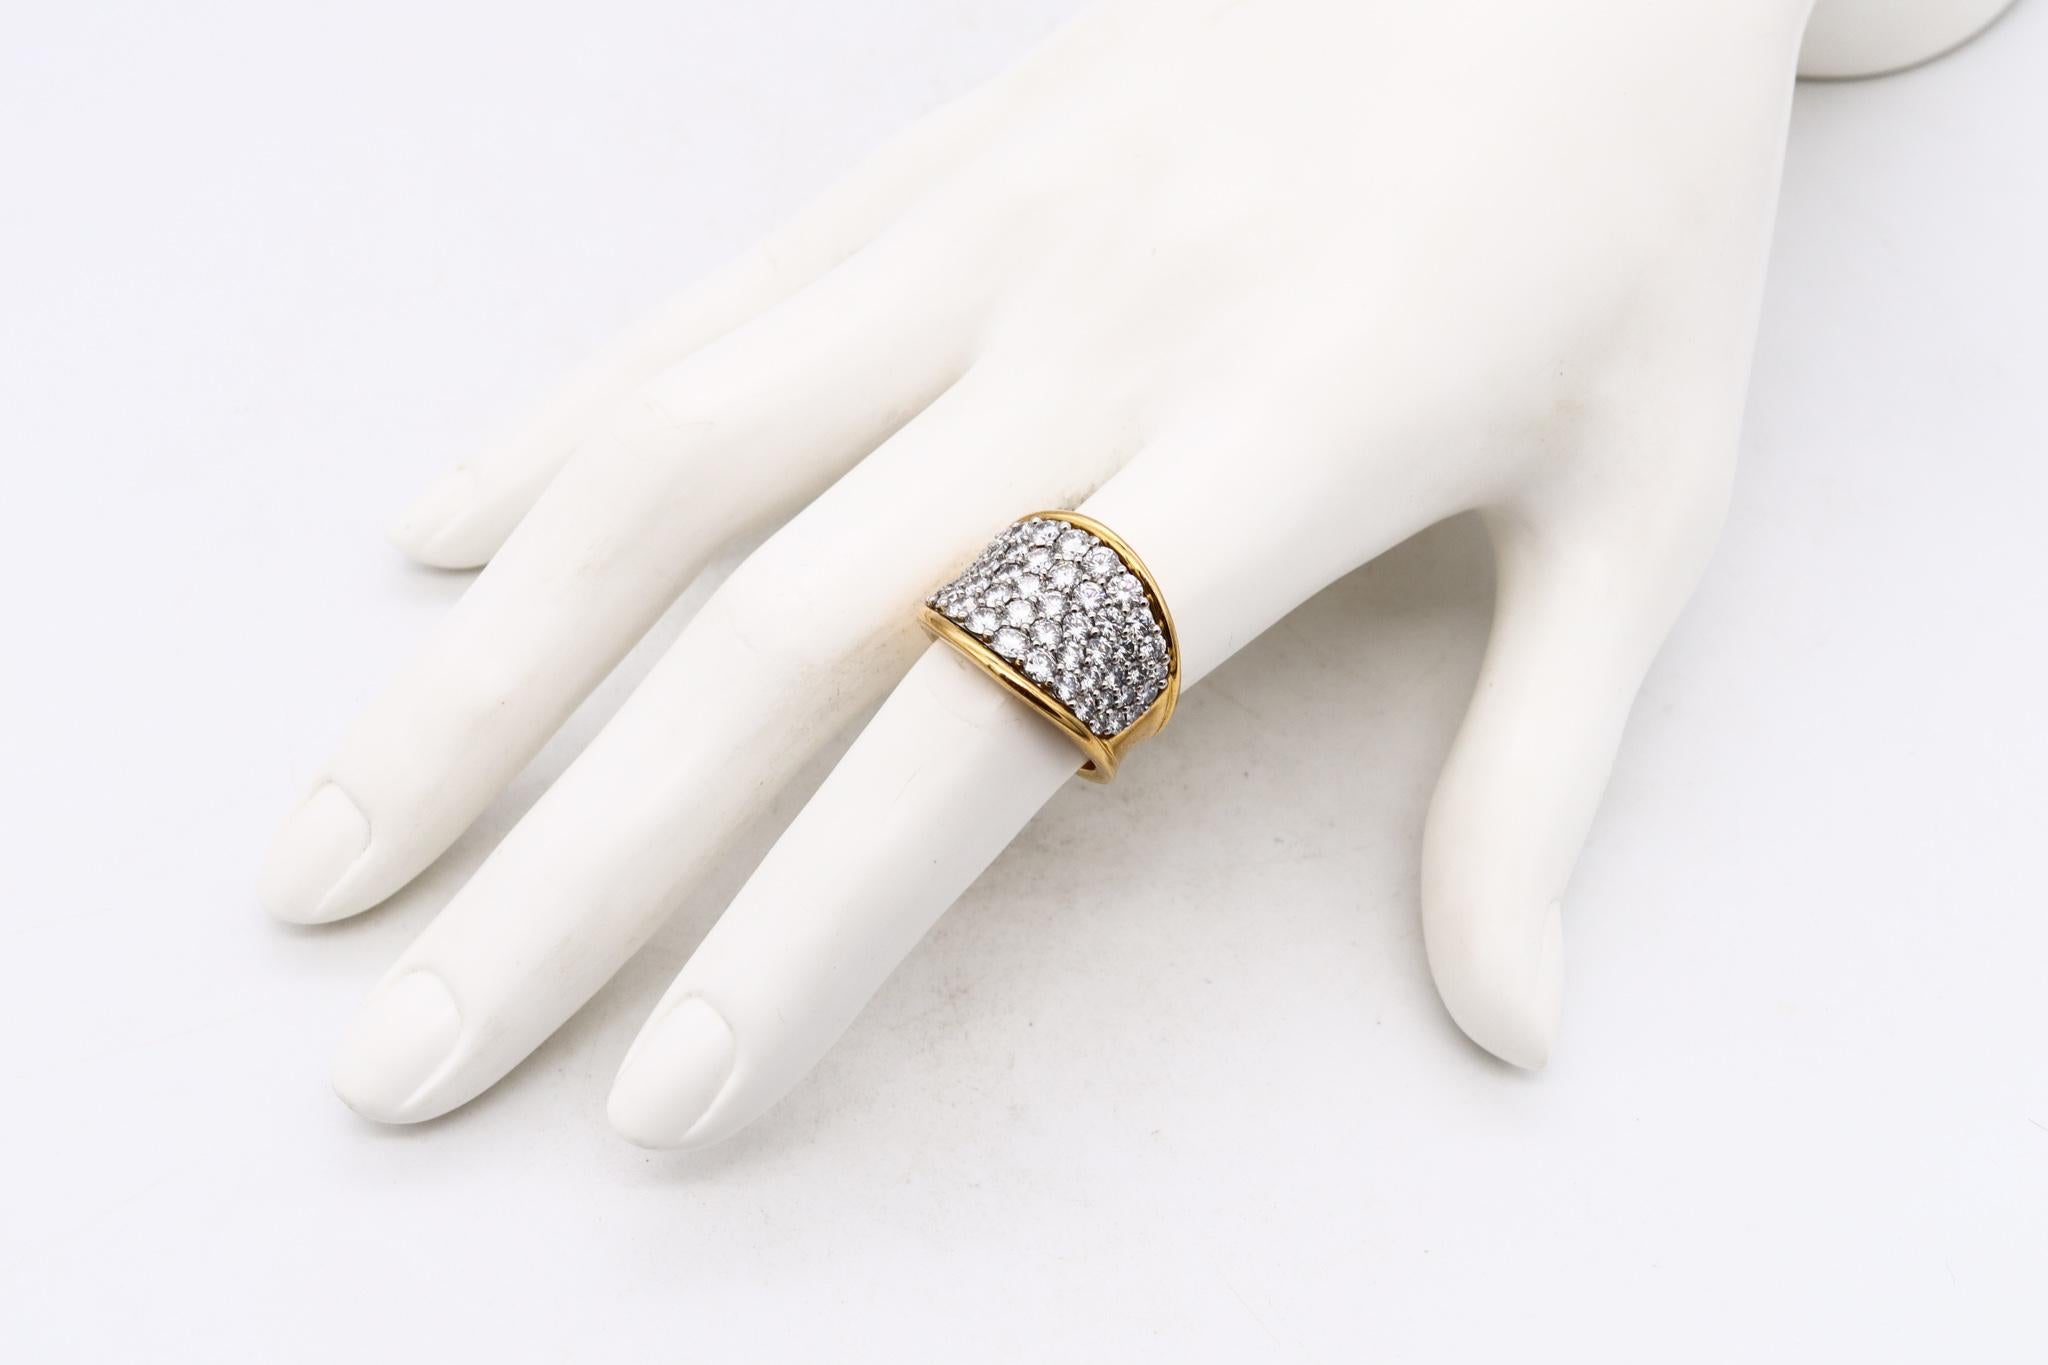 Designer ring with Exceptional Diamonds.

A modern one-of-a-kind sleek piece carefully crafted in solid yellow gold of 18 karats, with the surfaces finished with high polish. The upper part is made up with a .950/.999 platinum honeycomb element for